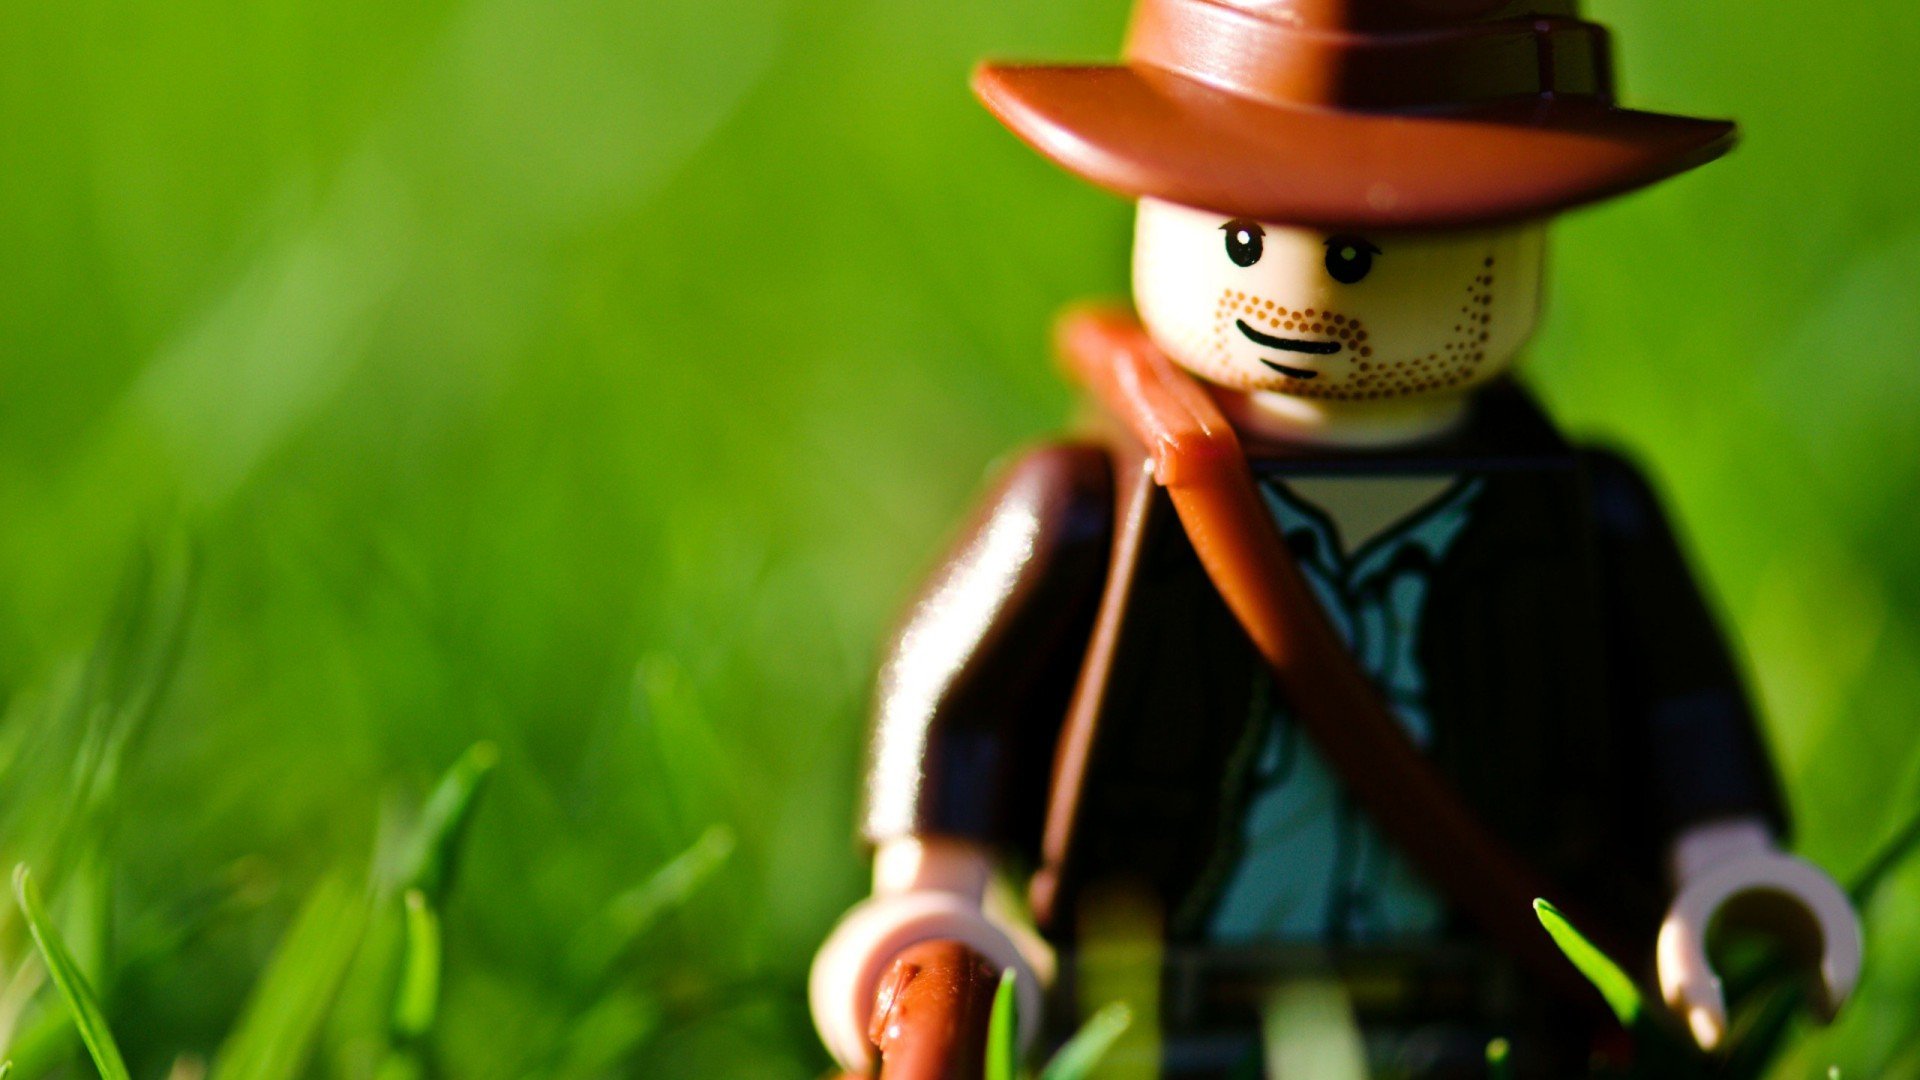 Free download Lego Indiana Jones Wallpaper High Definition High Quality [1920x1080] for your Desktop, Mobile & Tablet. Explore LEGO Indiana Jones Wallpaper. LEGO Indiana Jones Wallpaper, Indiana Jones Wallpaper